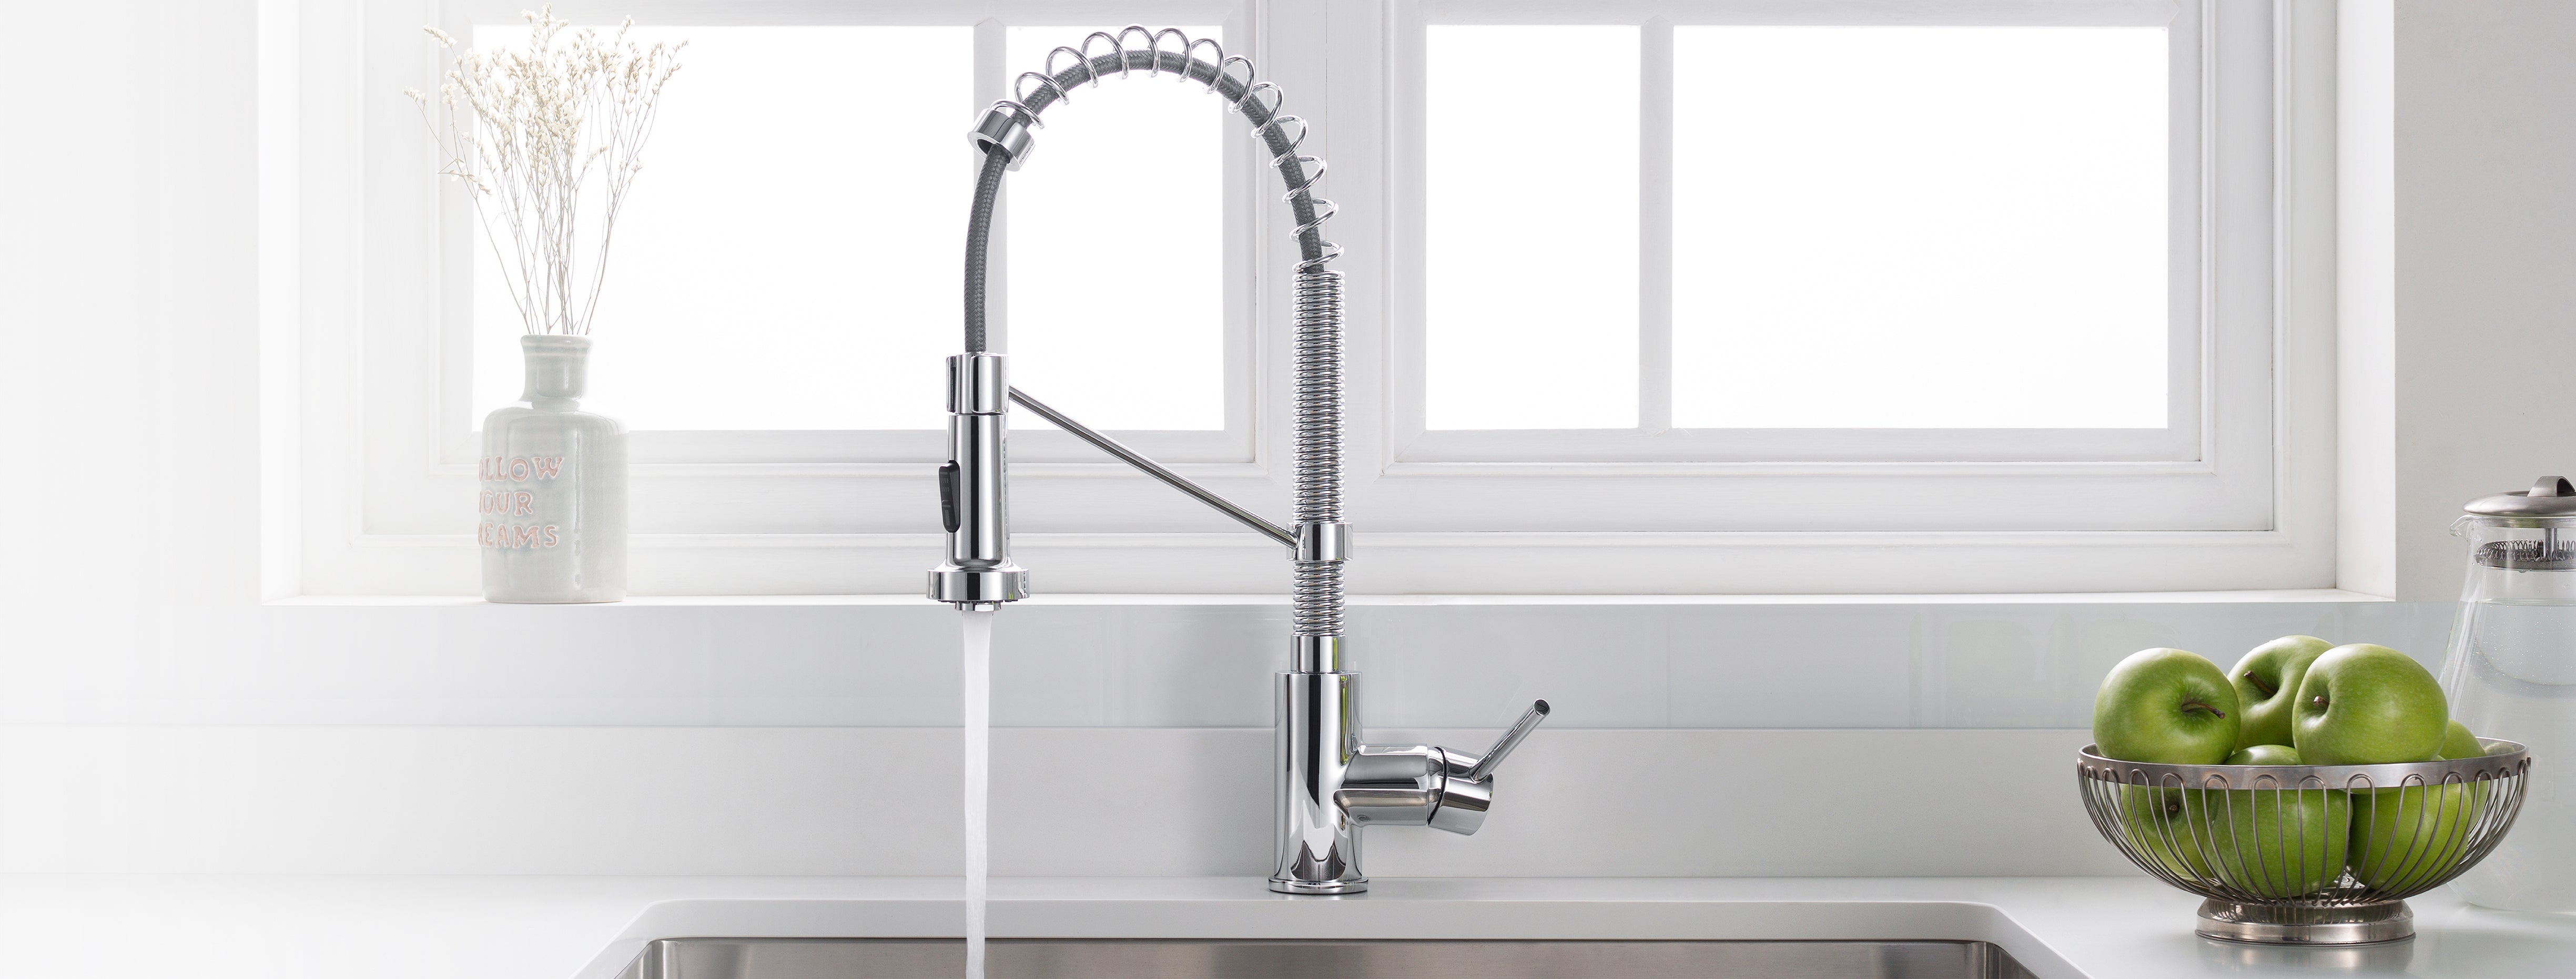 Bolden the Bold: One Sexy Faucet